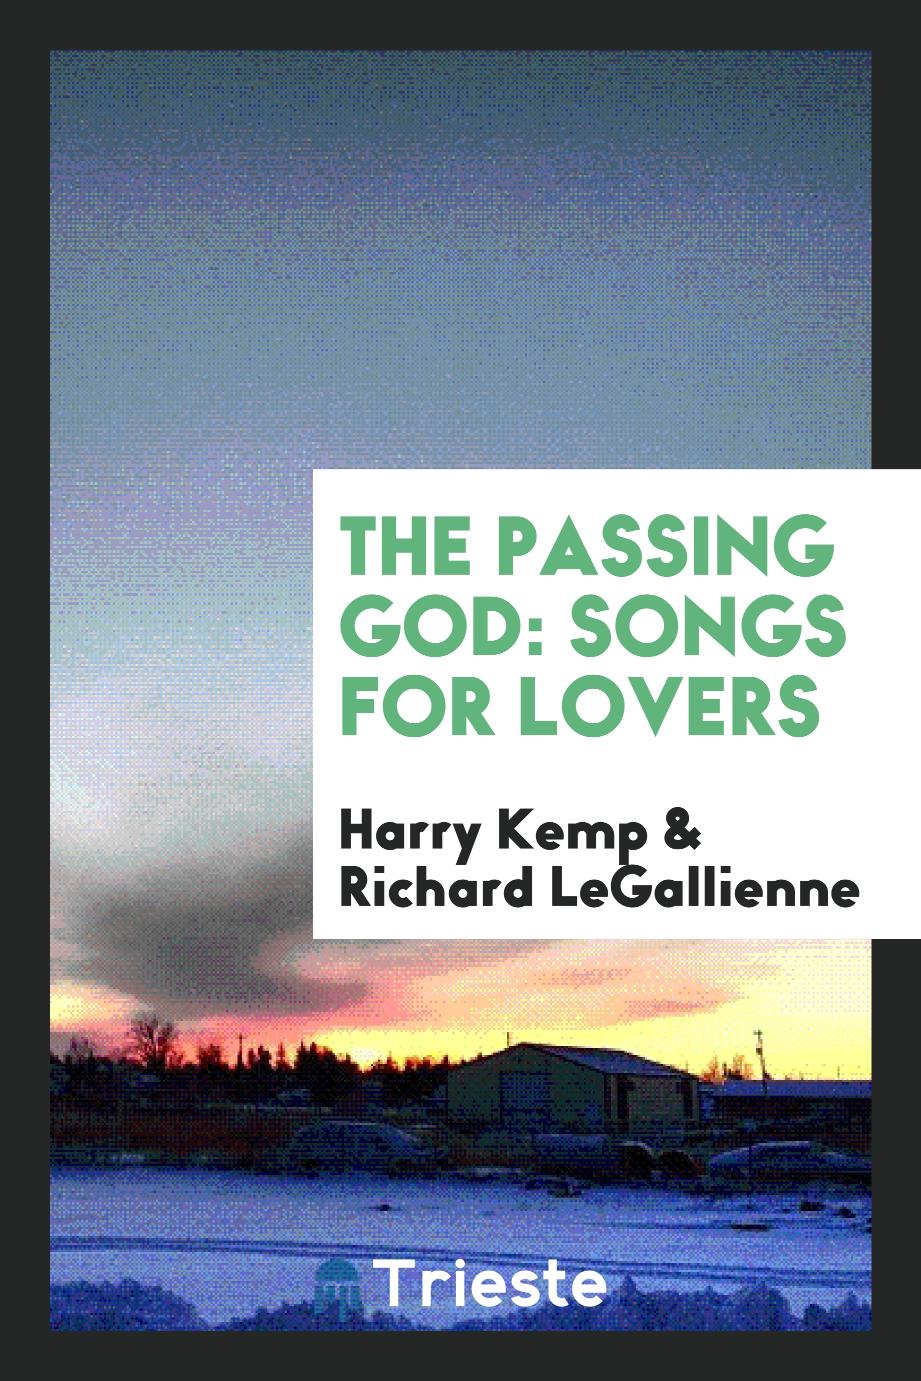 The Passing God: Songs for Lovers